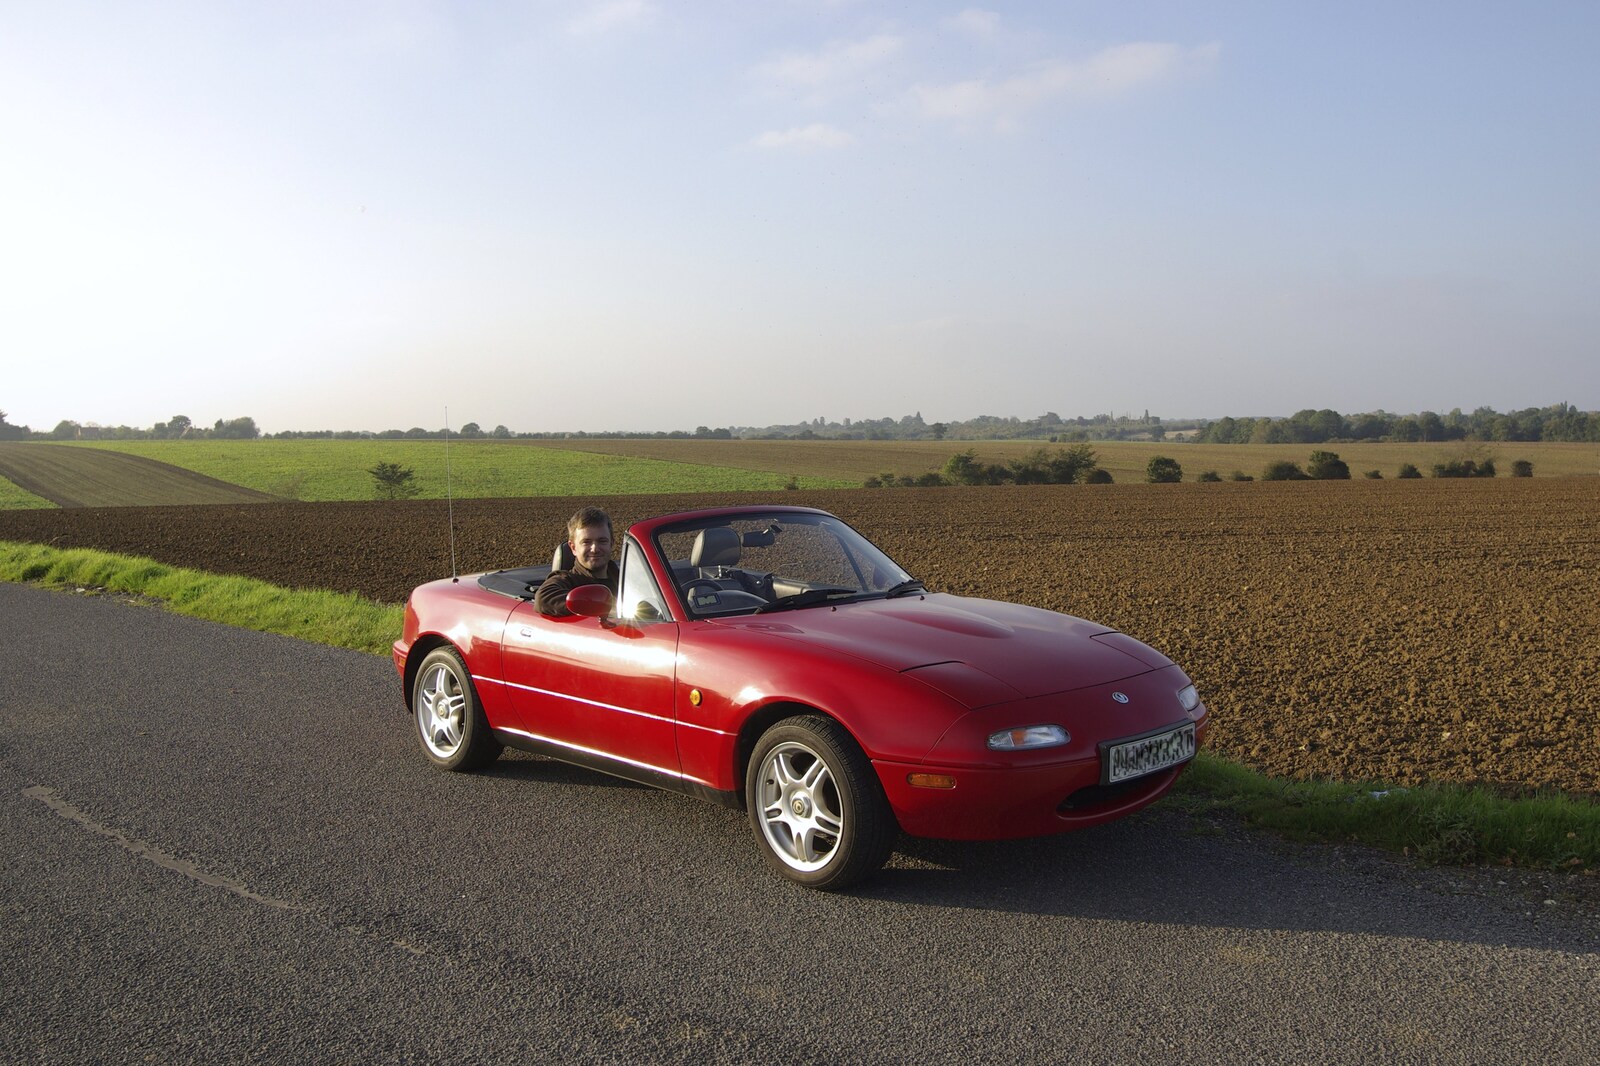 A Road Trip in an MX-5, and Athlete at the UEA, Lavenham and Norwich - 14th October 2007: Nosher in his new toy